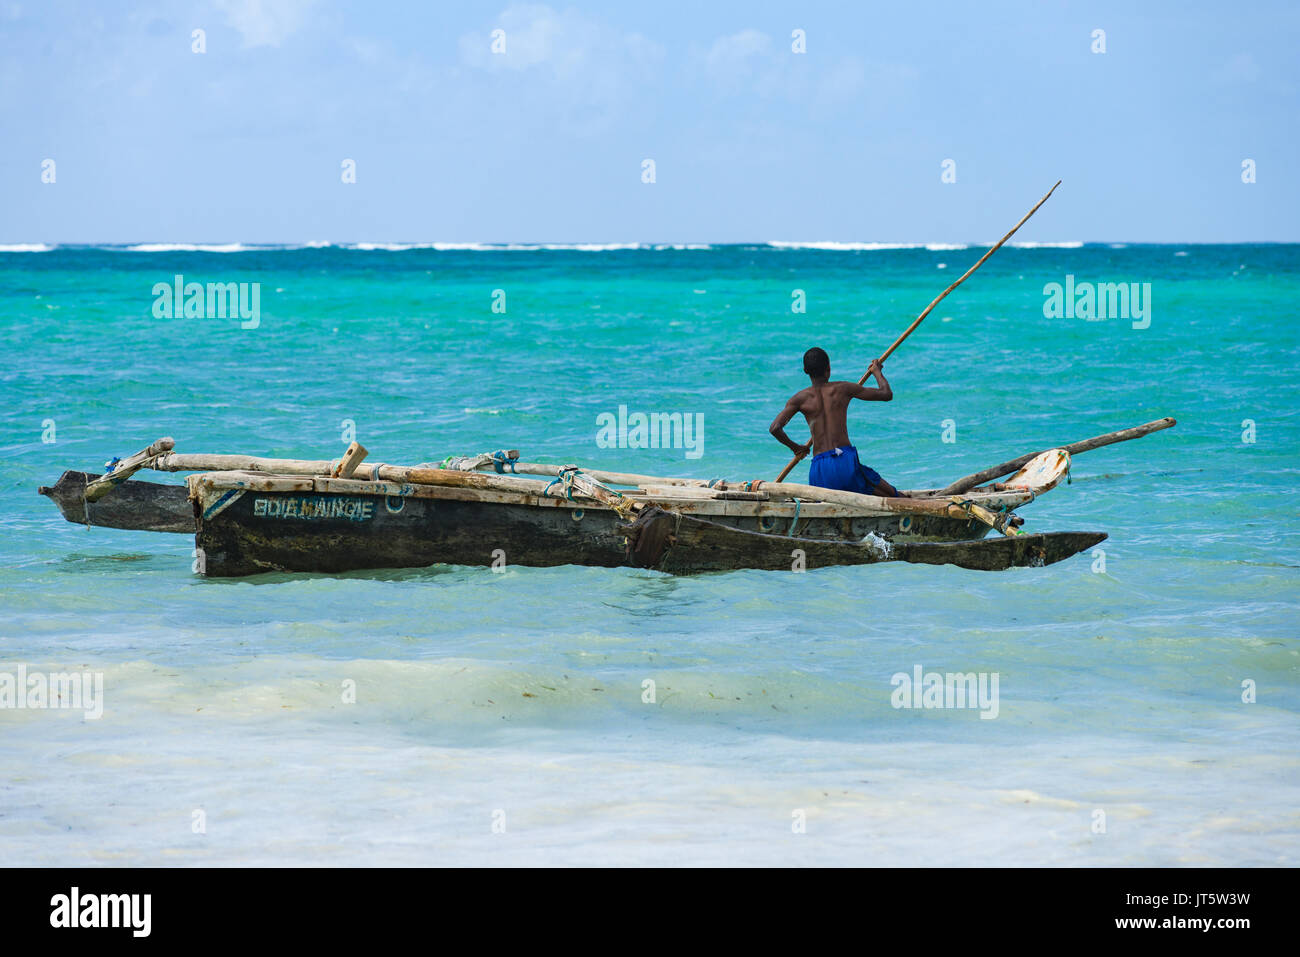 Fisherman in traditional dhow fishing boat taking it out to sea with wooden pole, Diani, Kenya Stock Photo